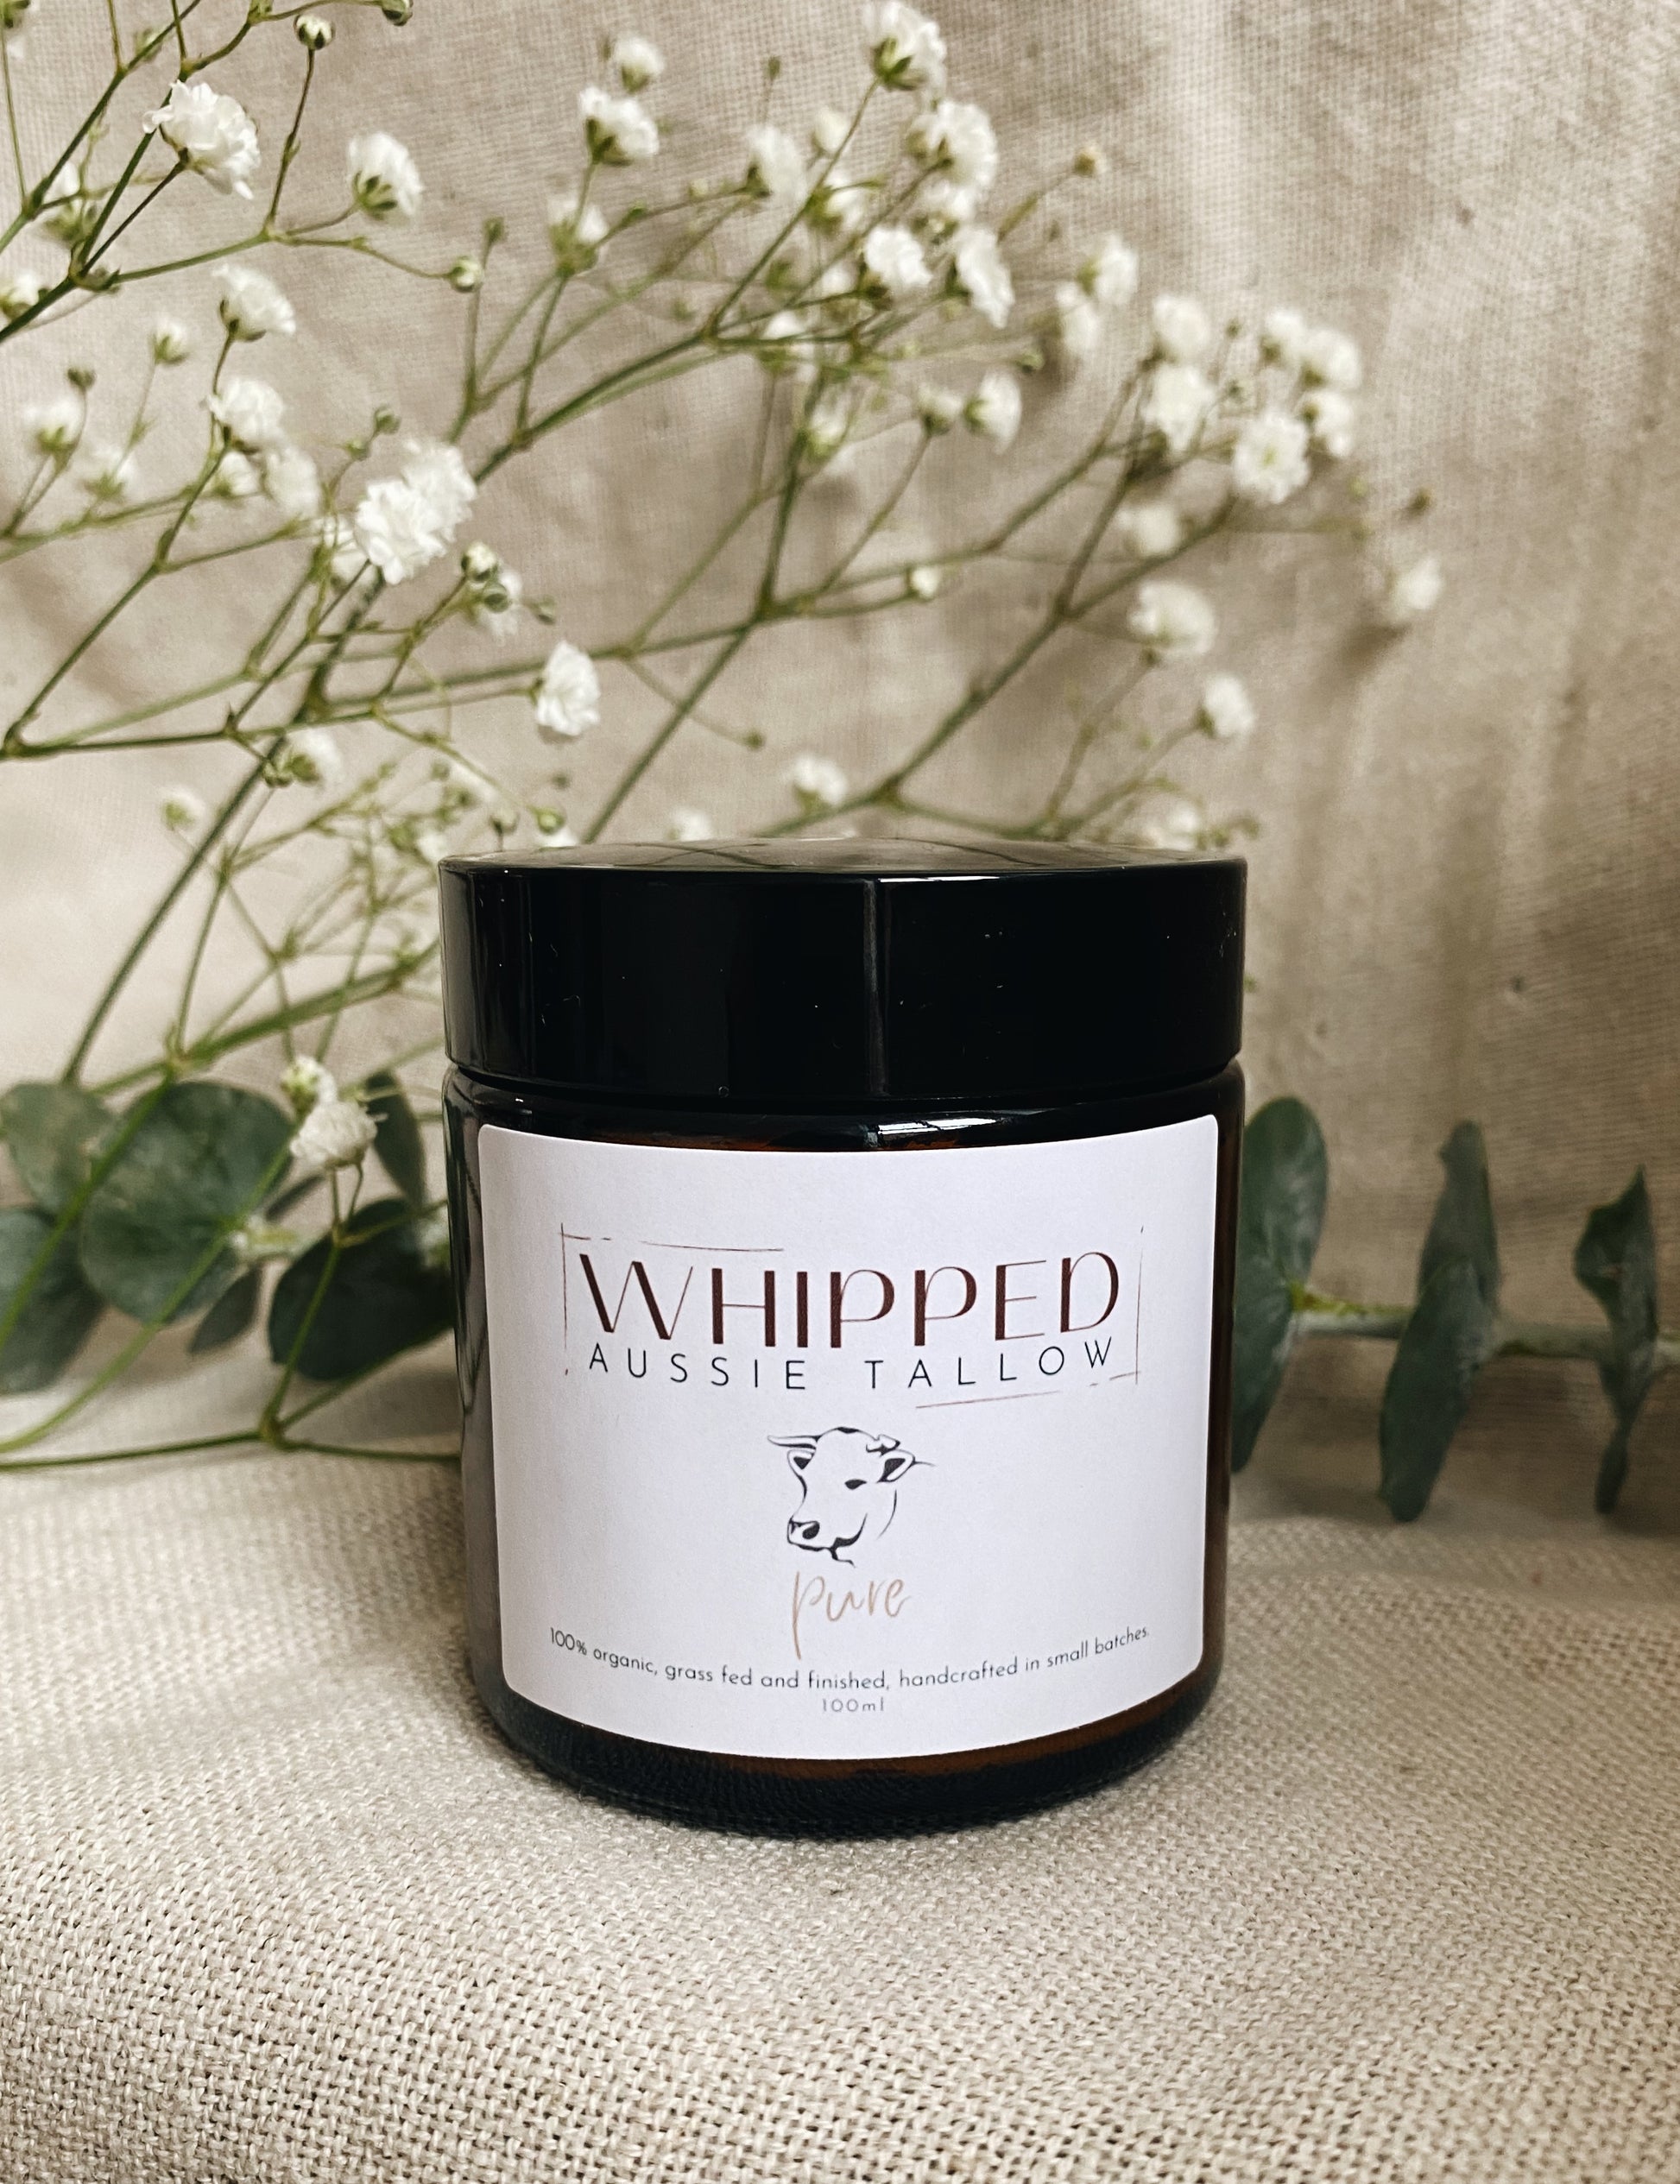 WHIPPED. Aussie Tallow - pure